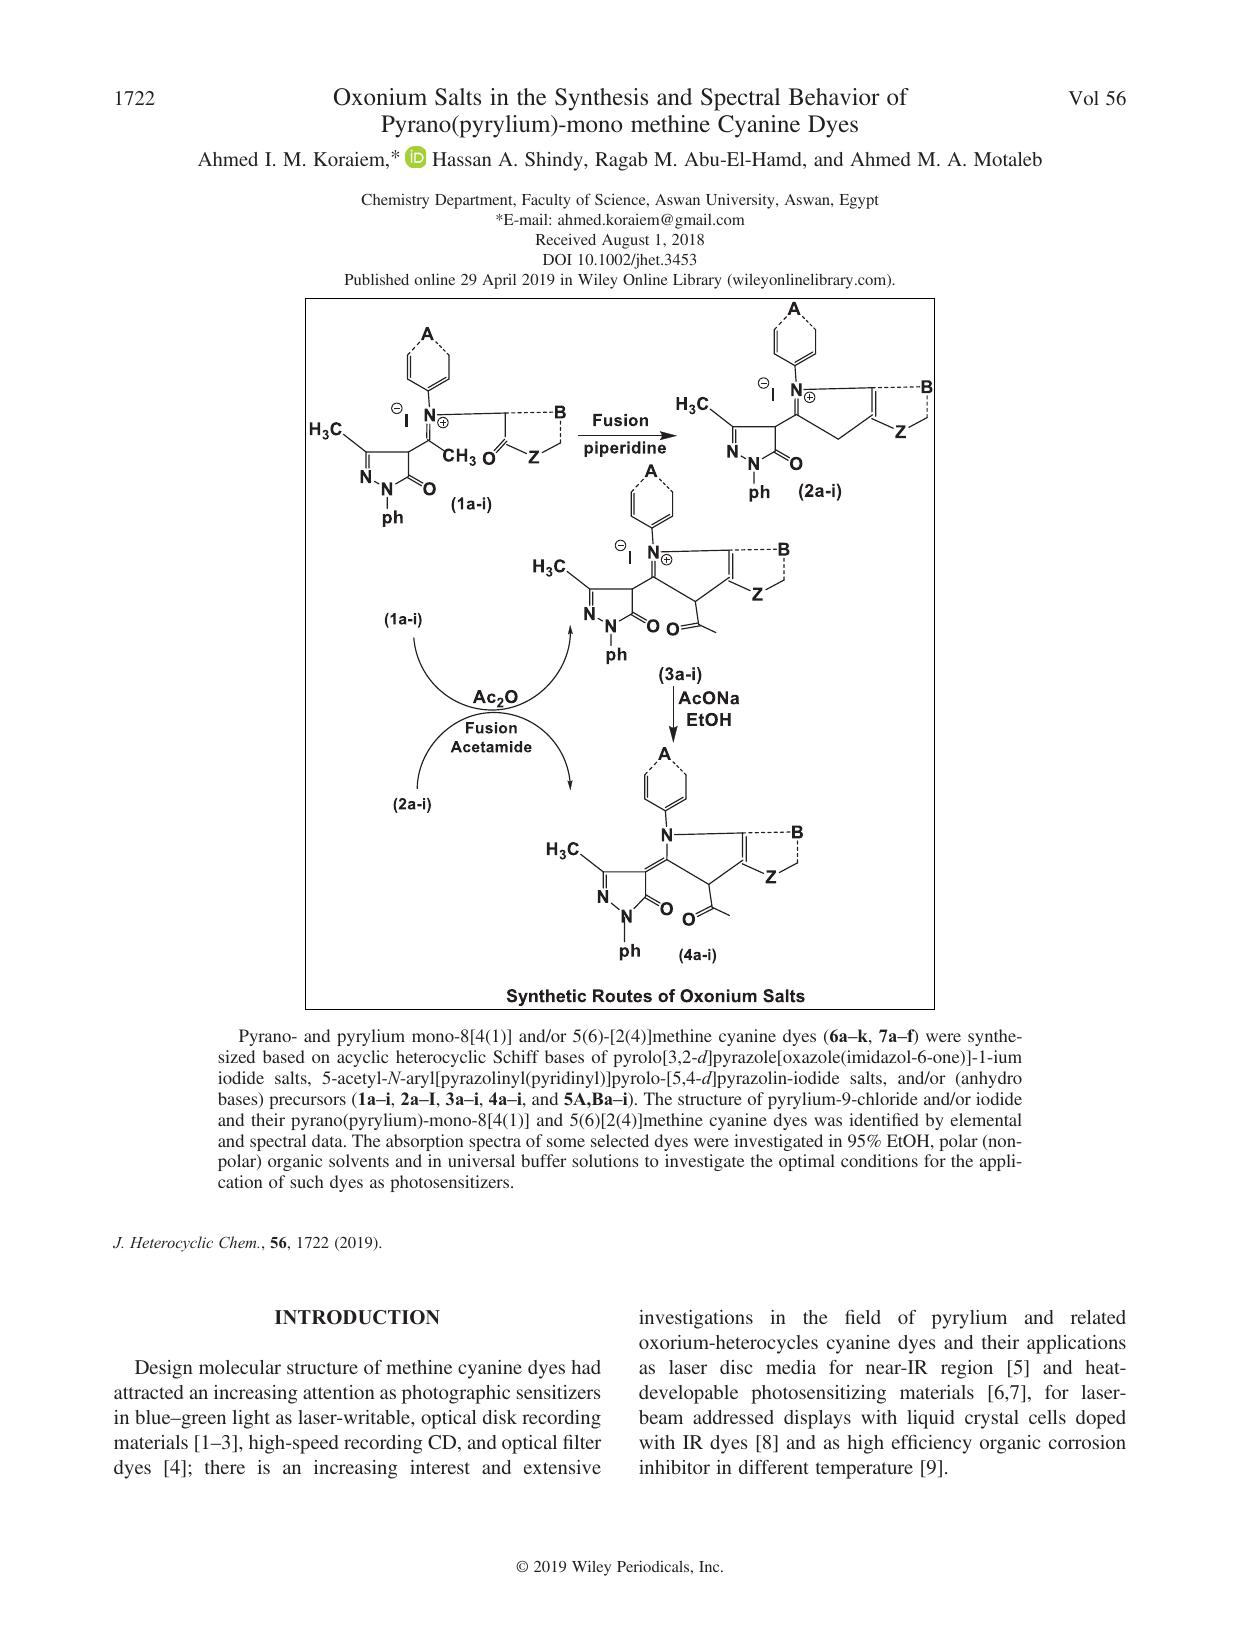 Oxonium Salts in the Synthesis and Spectral Behavior of Pyrano(pyrylium)-mono methine Cyanine Dyes by Ahmed I. M. Koraiem Hassan A. Shindy Ragab M. Abu-El-Hamd Ahmed M. A. Motaleb